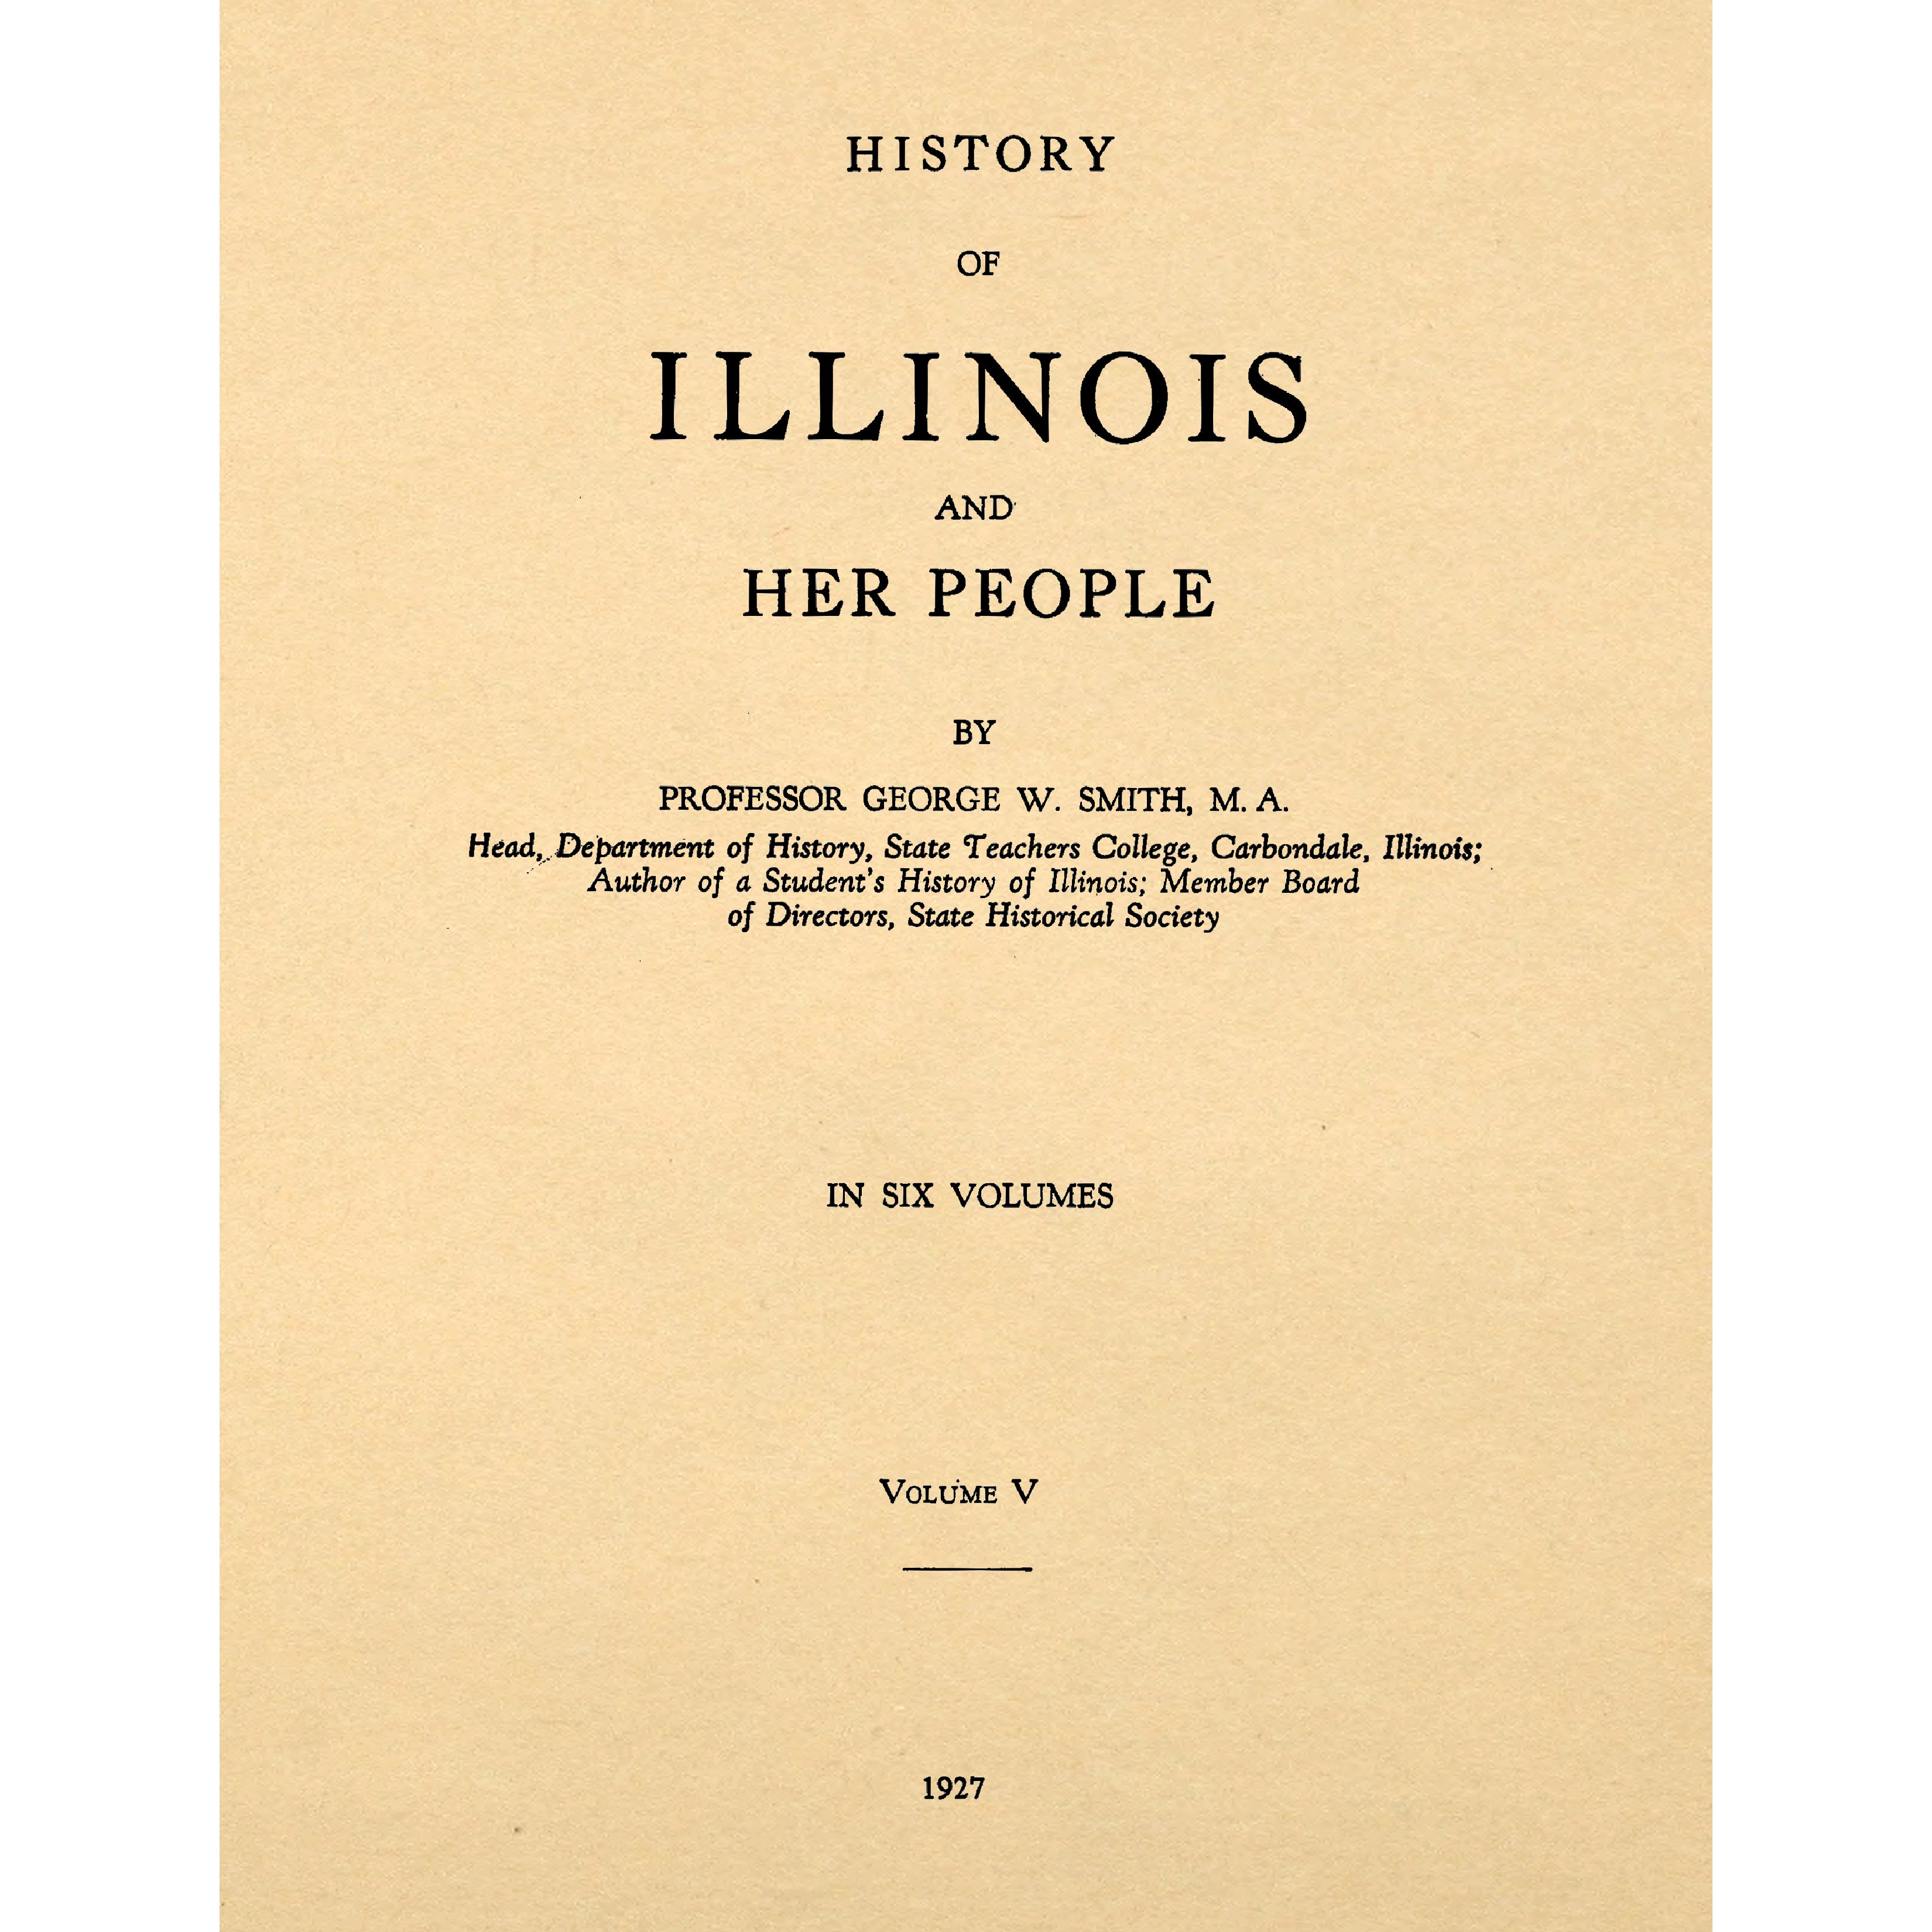 History of Illinois and her people Vol. 5